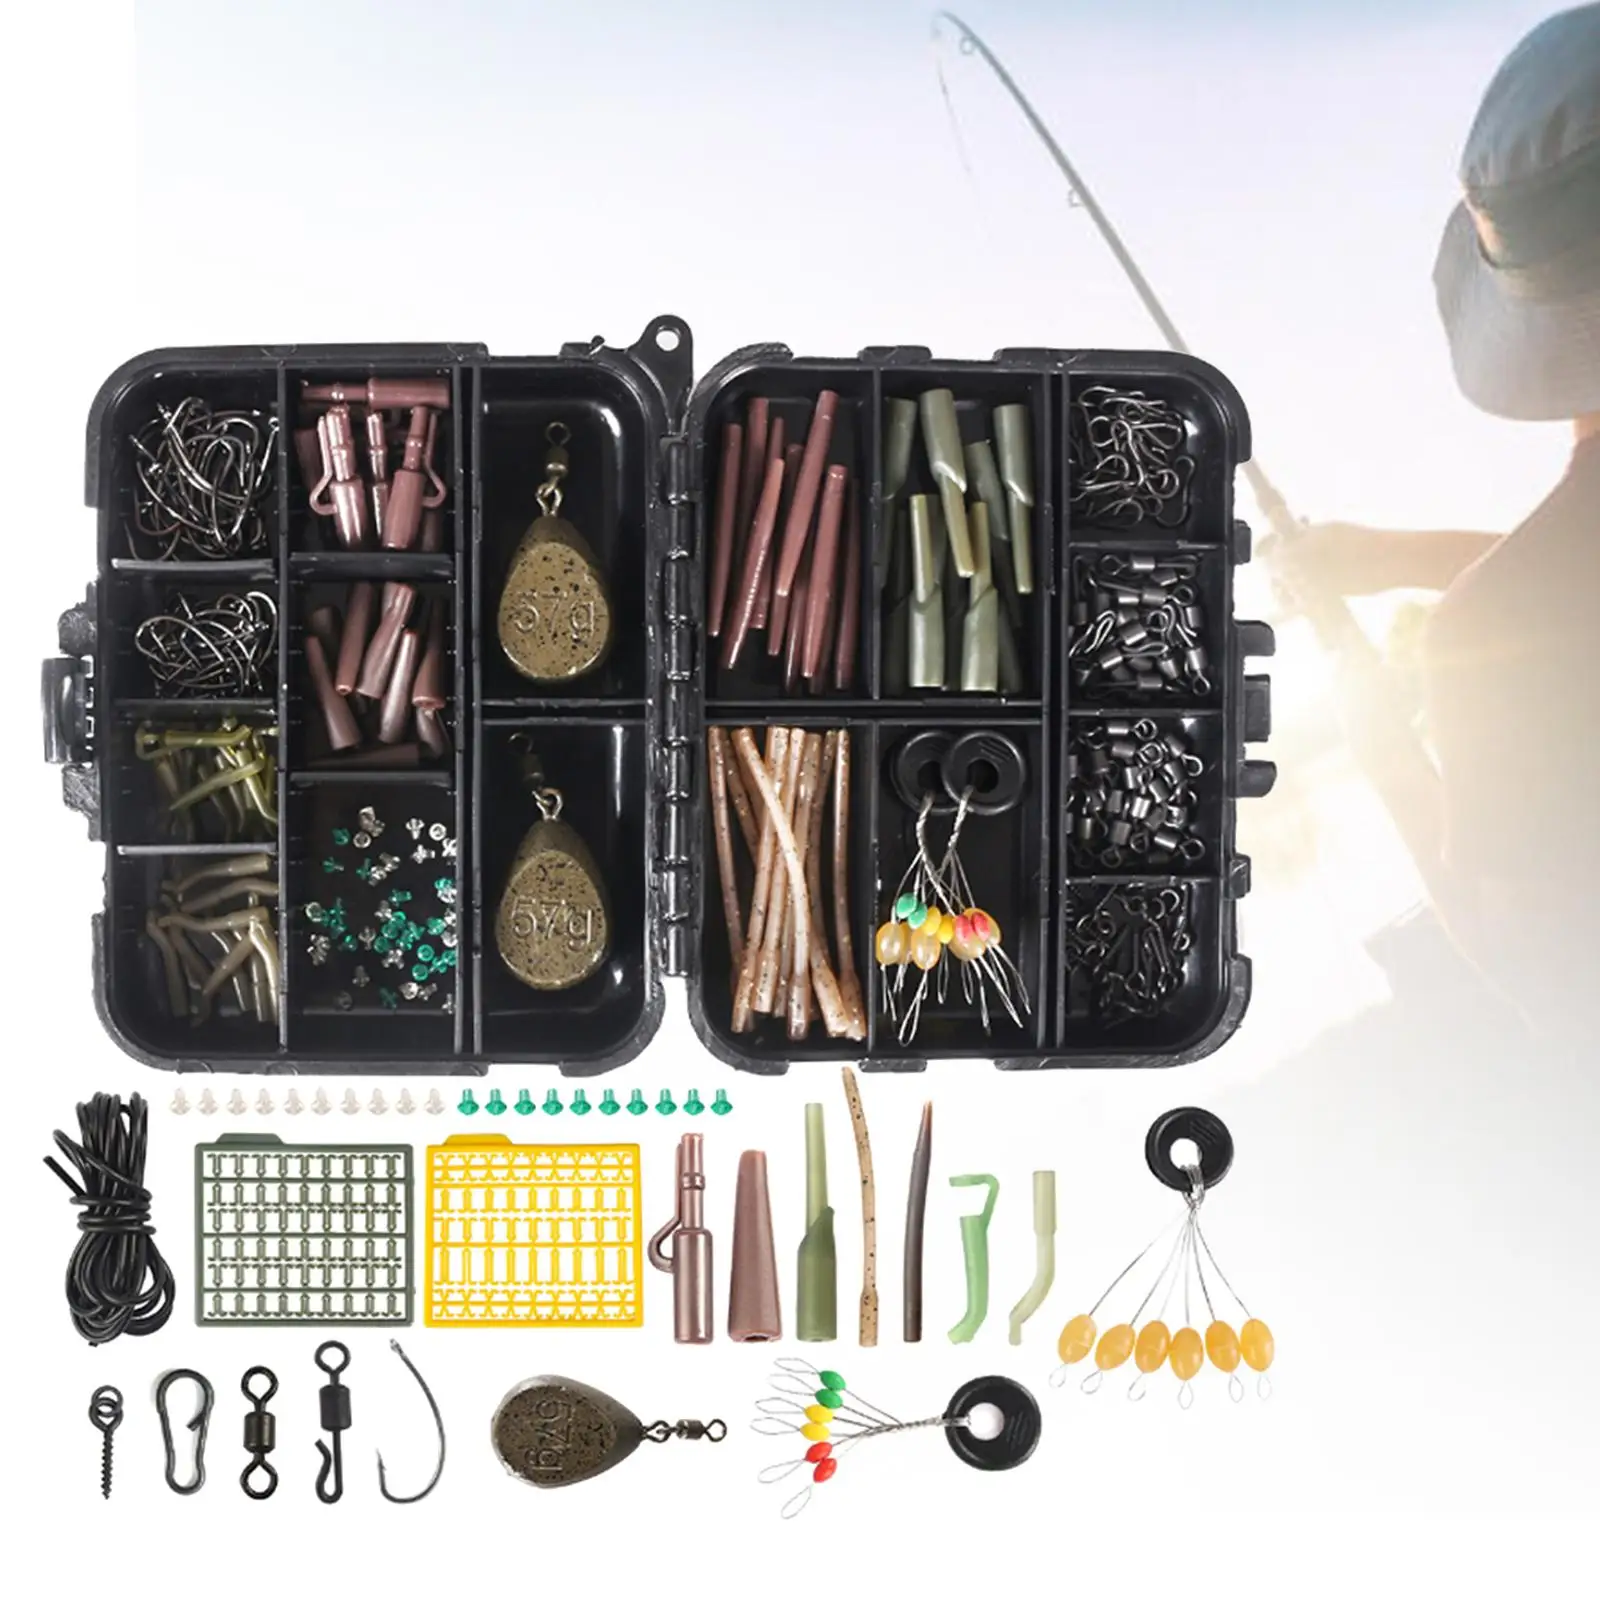 Fishing Accessories Set Portable Equipment Gear Sinker Weights Space Beans for Outdoor Fishing Carp Baits Rigs Carp Fishing